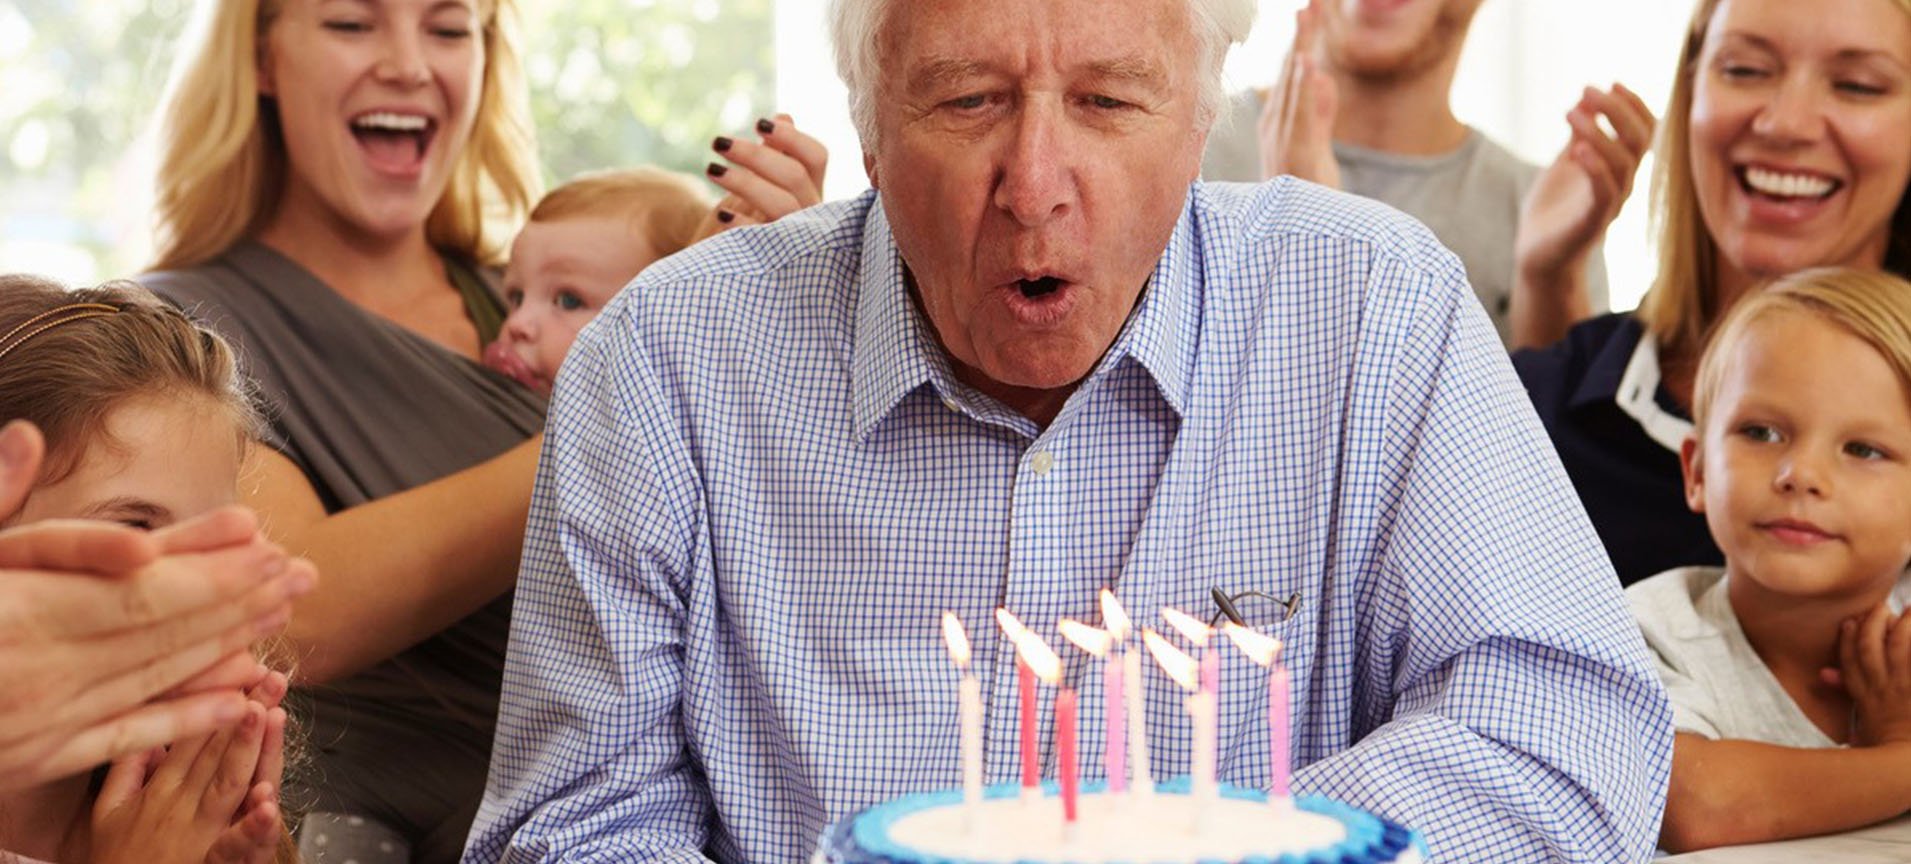 A man blows out candles on a birthday cake surrounded by his family.